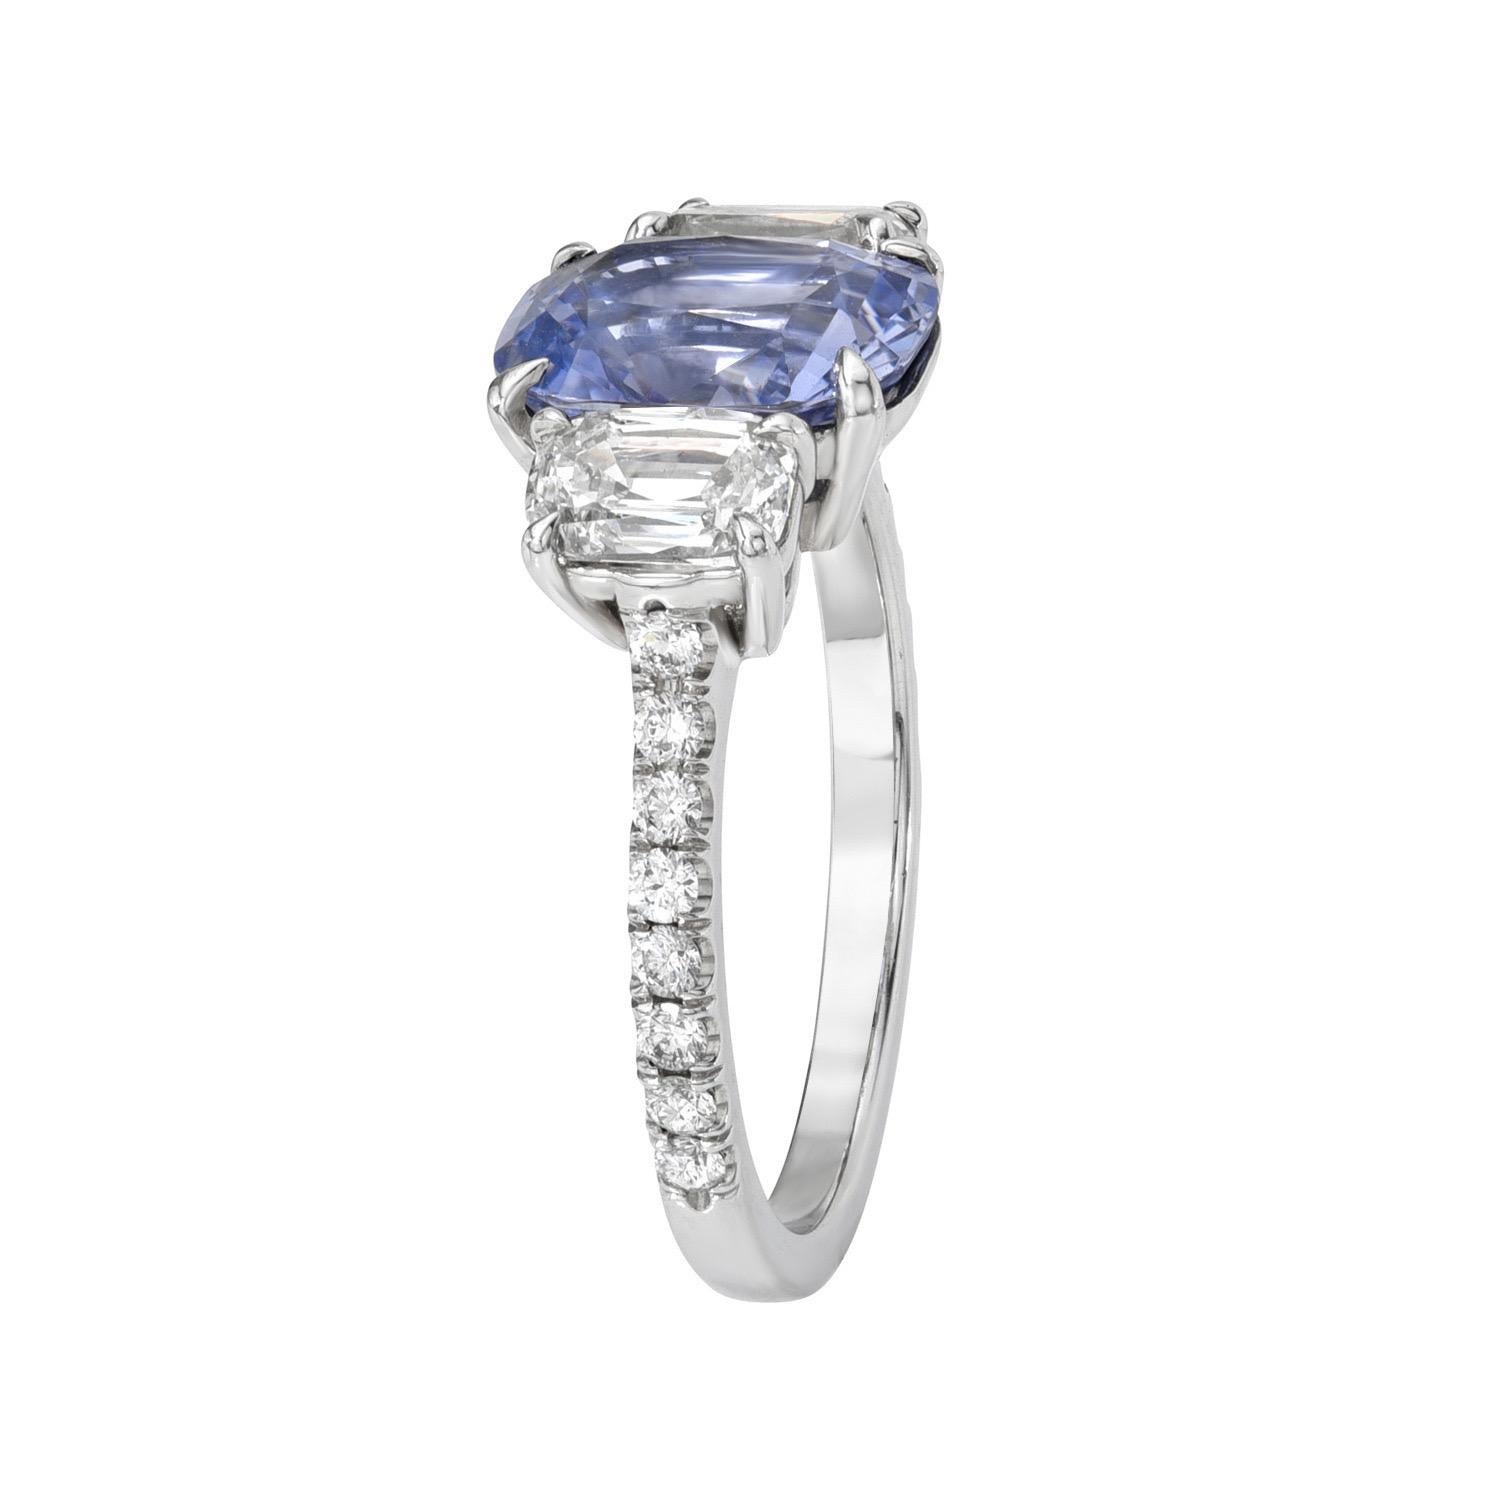 Vibrant and unique 2.79 carat unheated Blue Sapphire cushion, three stone platinum ring, flanked by a pair of 1.07 carat, I/SI1 cushion diamonds and a total of 0.24 carats of round brilliant diamonds
Ring size 6. Resizing is complementary upon